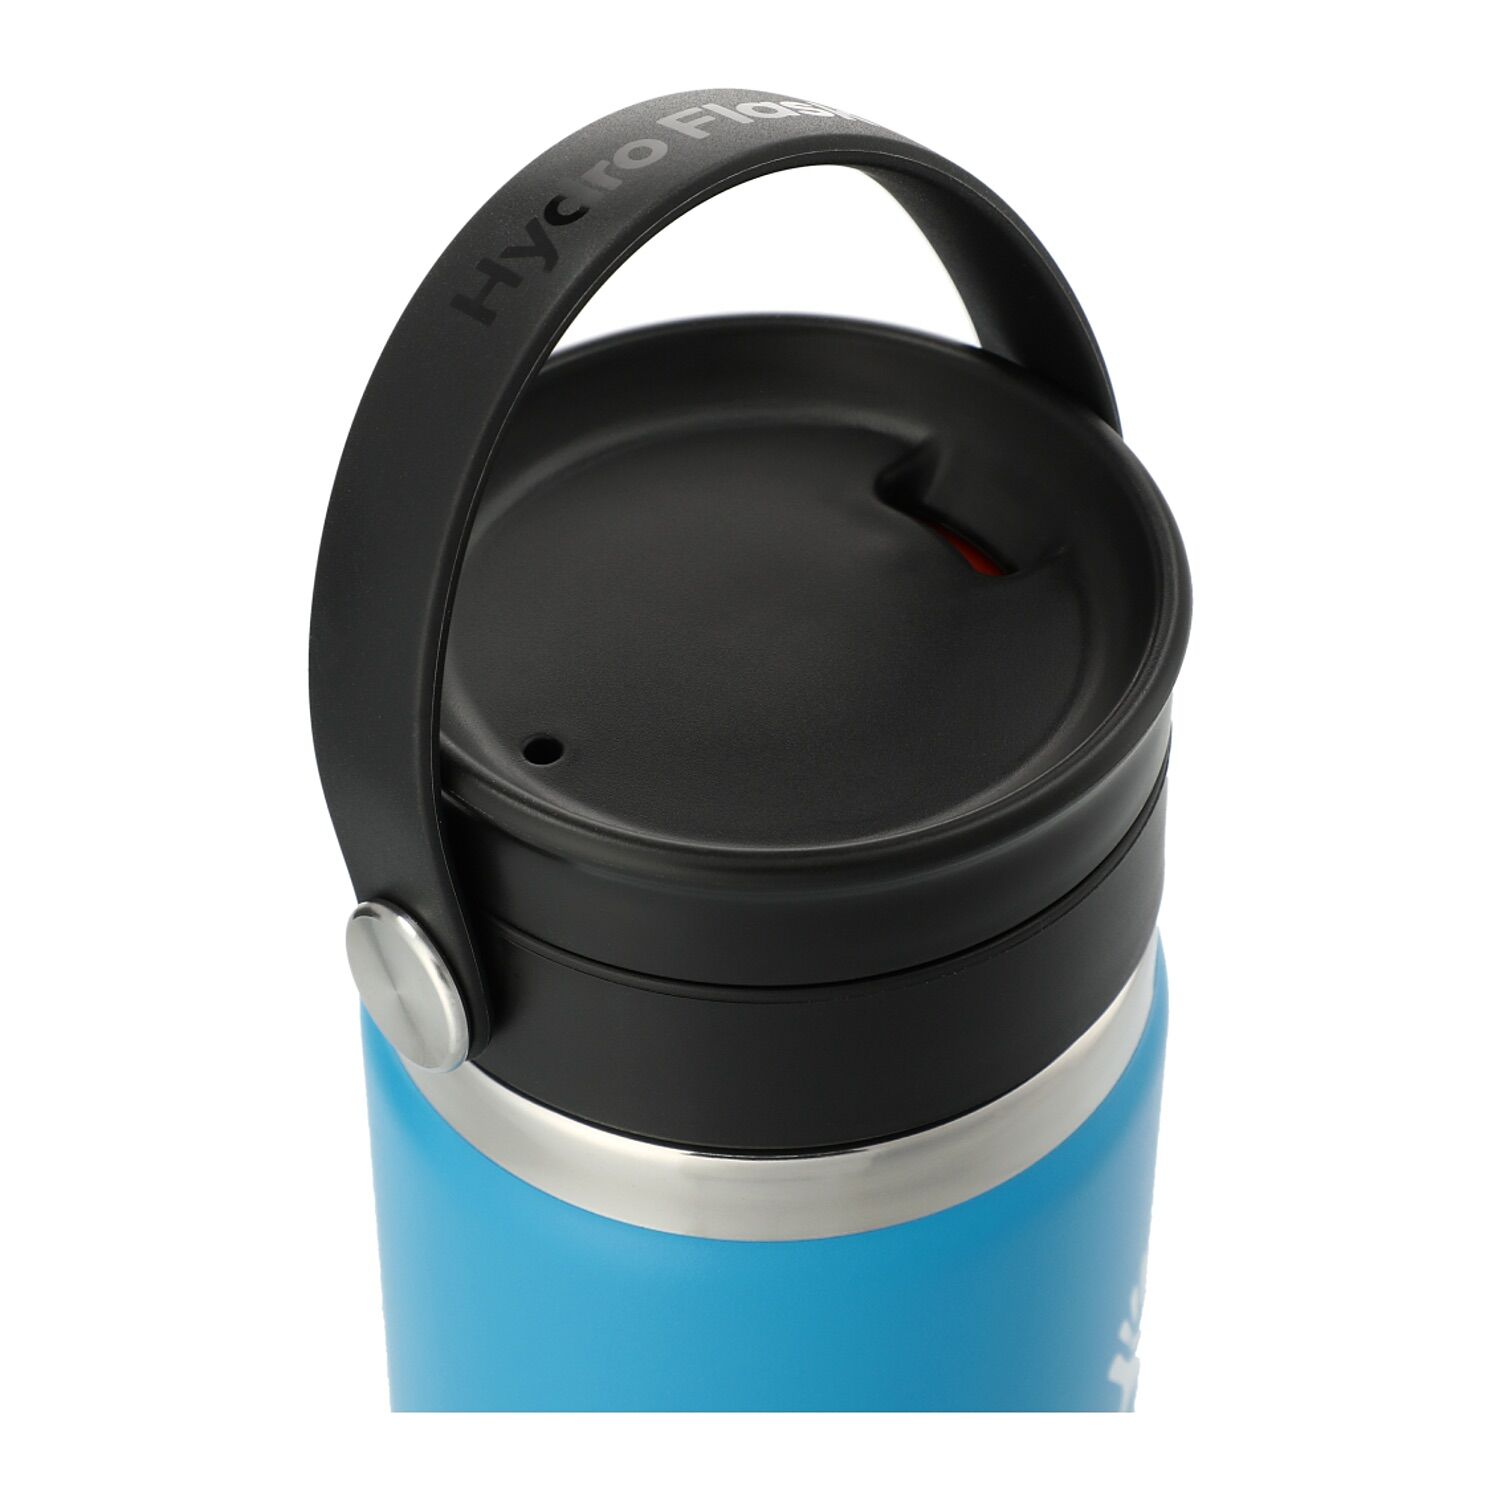 https://www.drivemerch.com/wp-content/uploads/2022/08/branded-hydro-flask-wide-mouth-with-flex-sip-lid-20-oz-pacific-lid.jpg